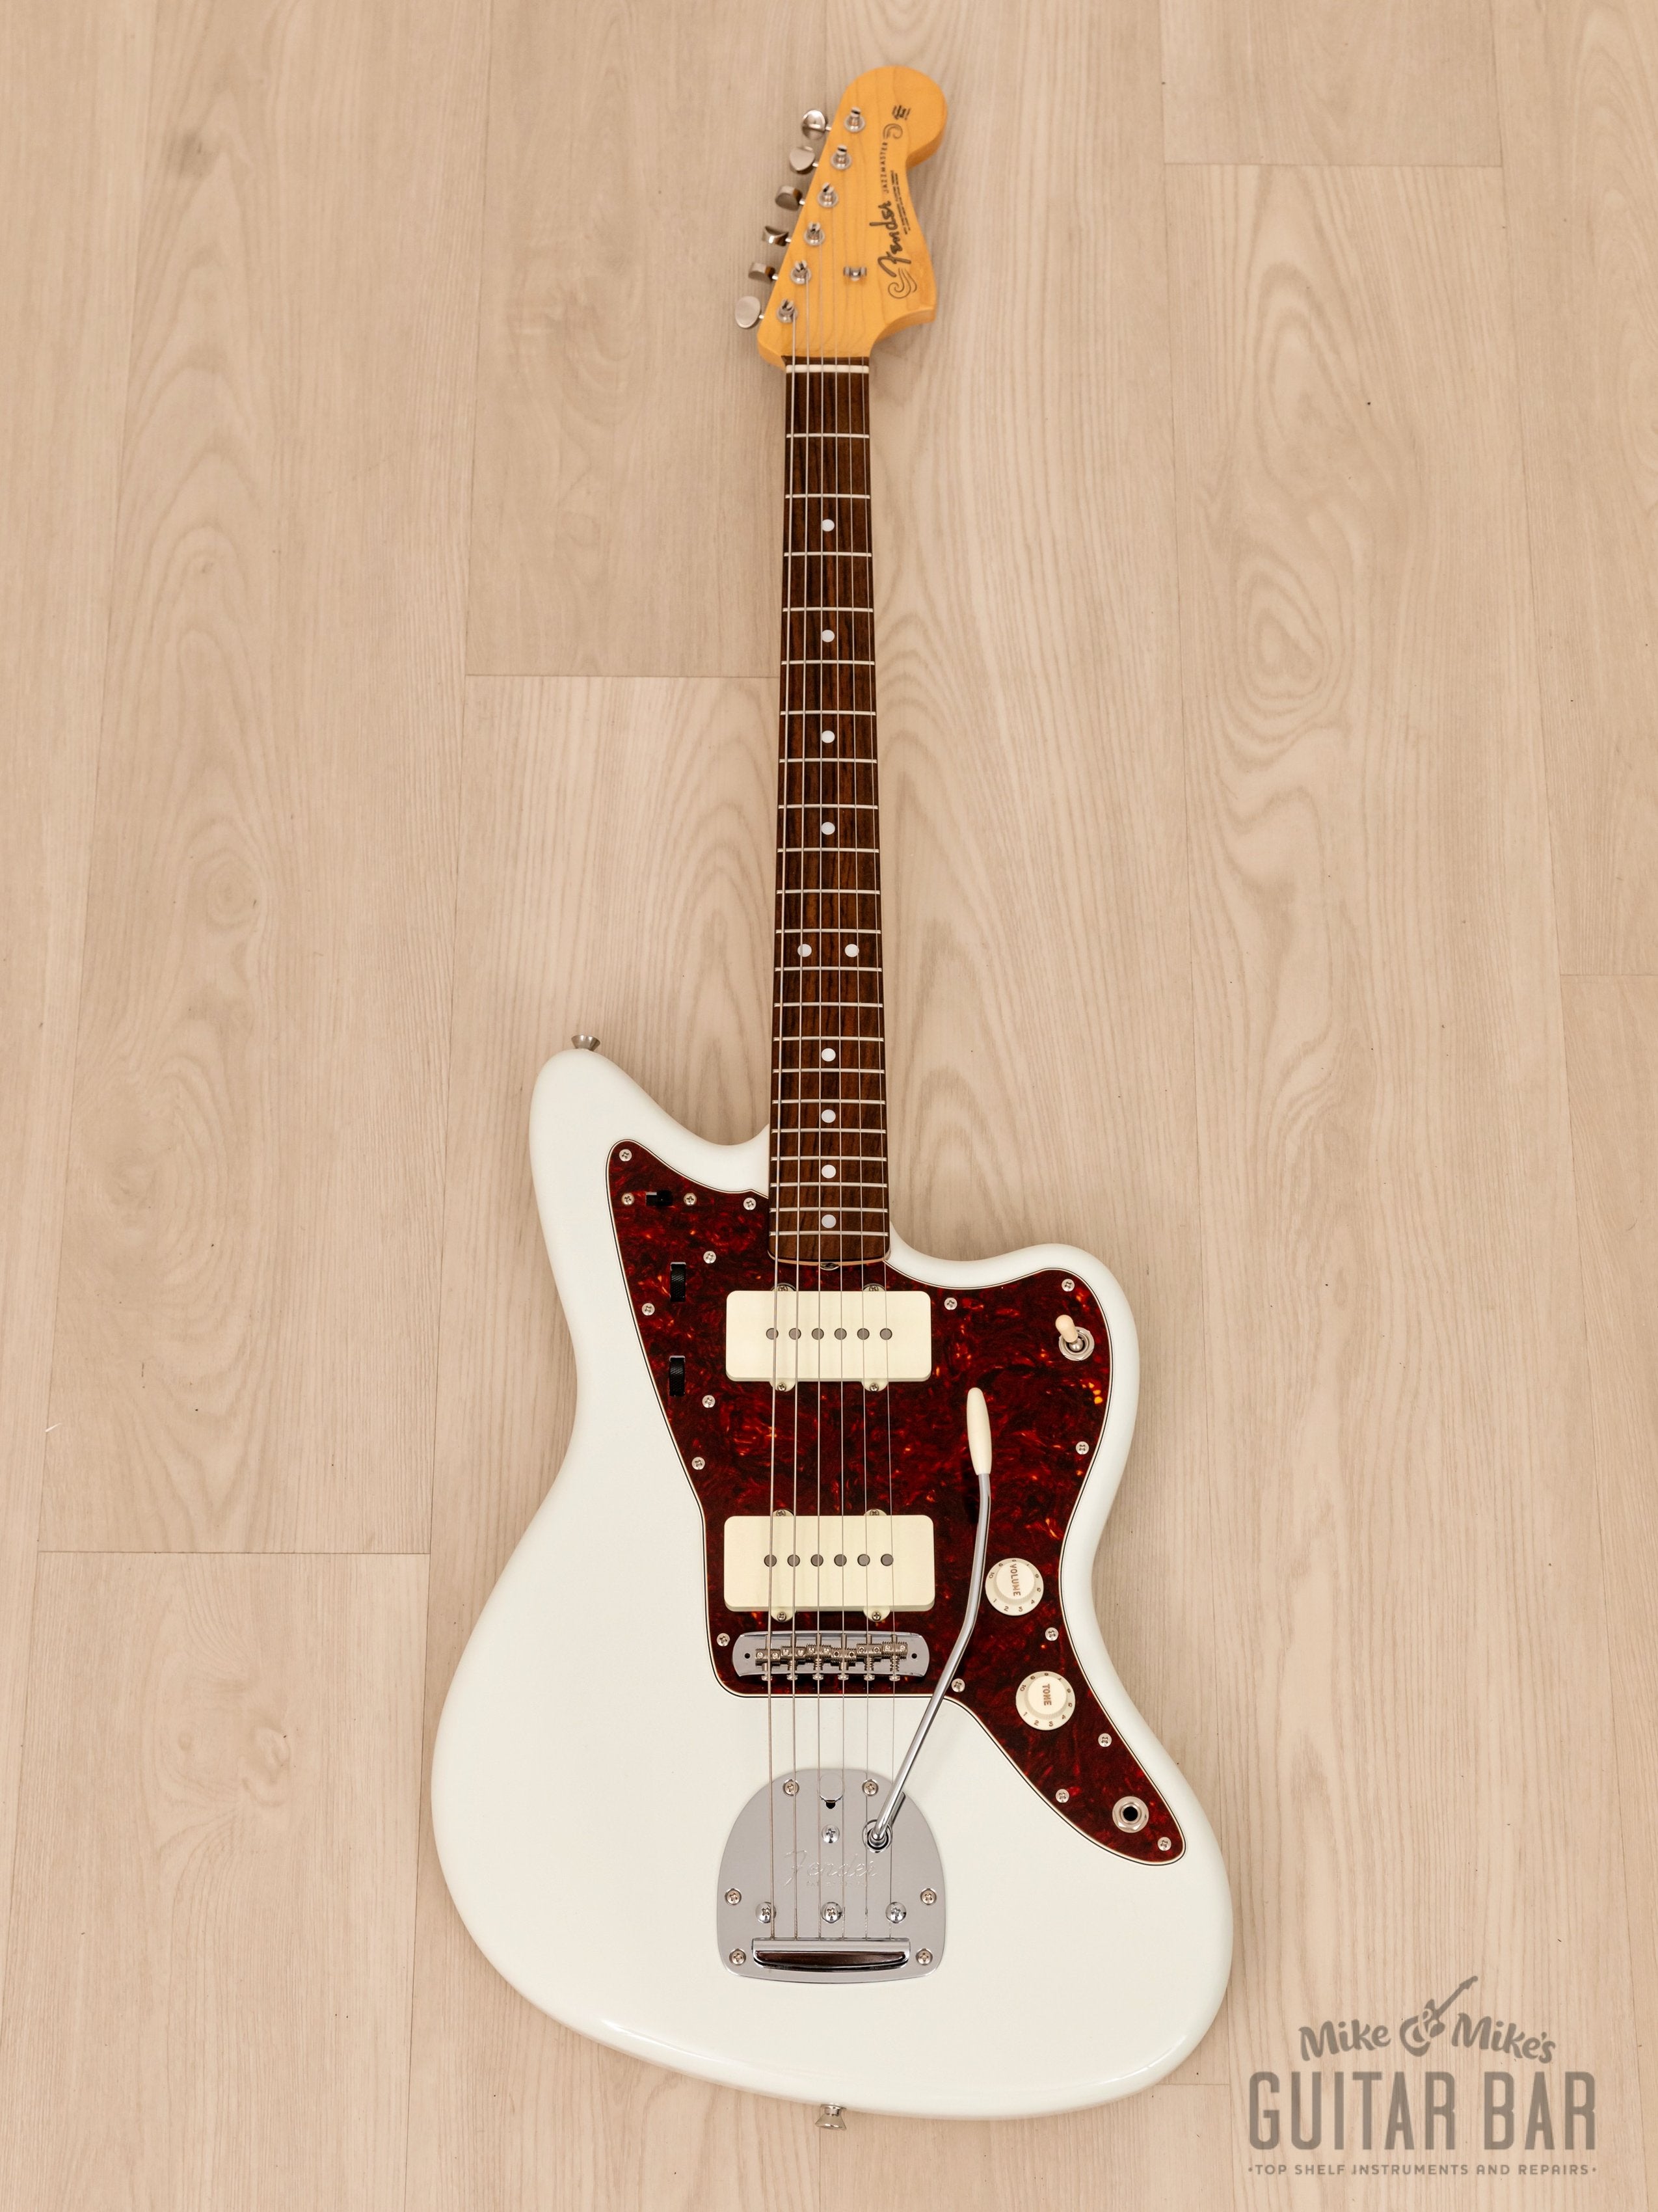 2023 Fender Traditional II 60s Jazzmaster Offset Guitar Olympic White w/ Hangtags, Japan MIJ